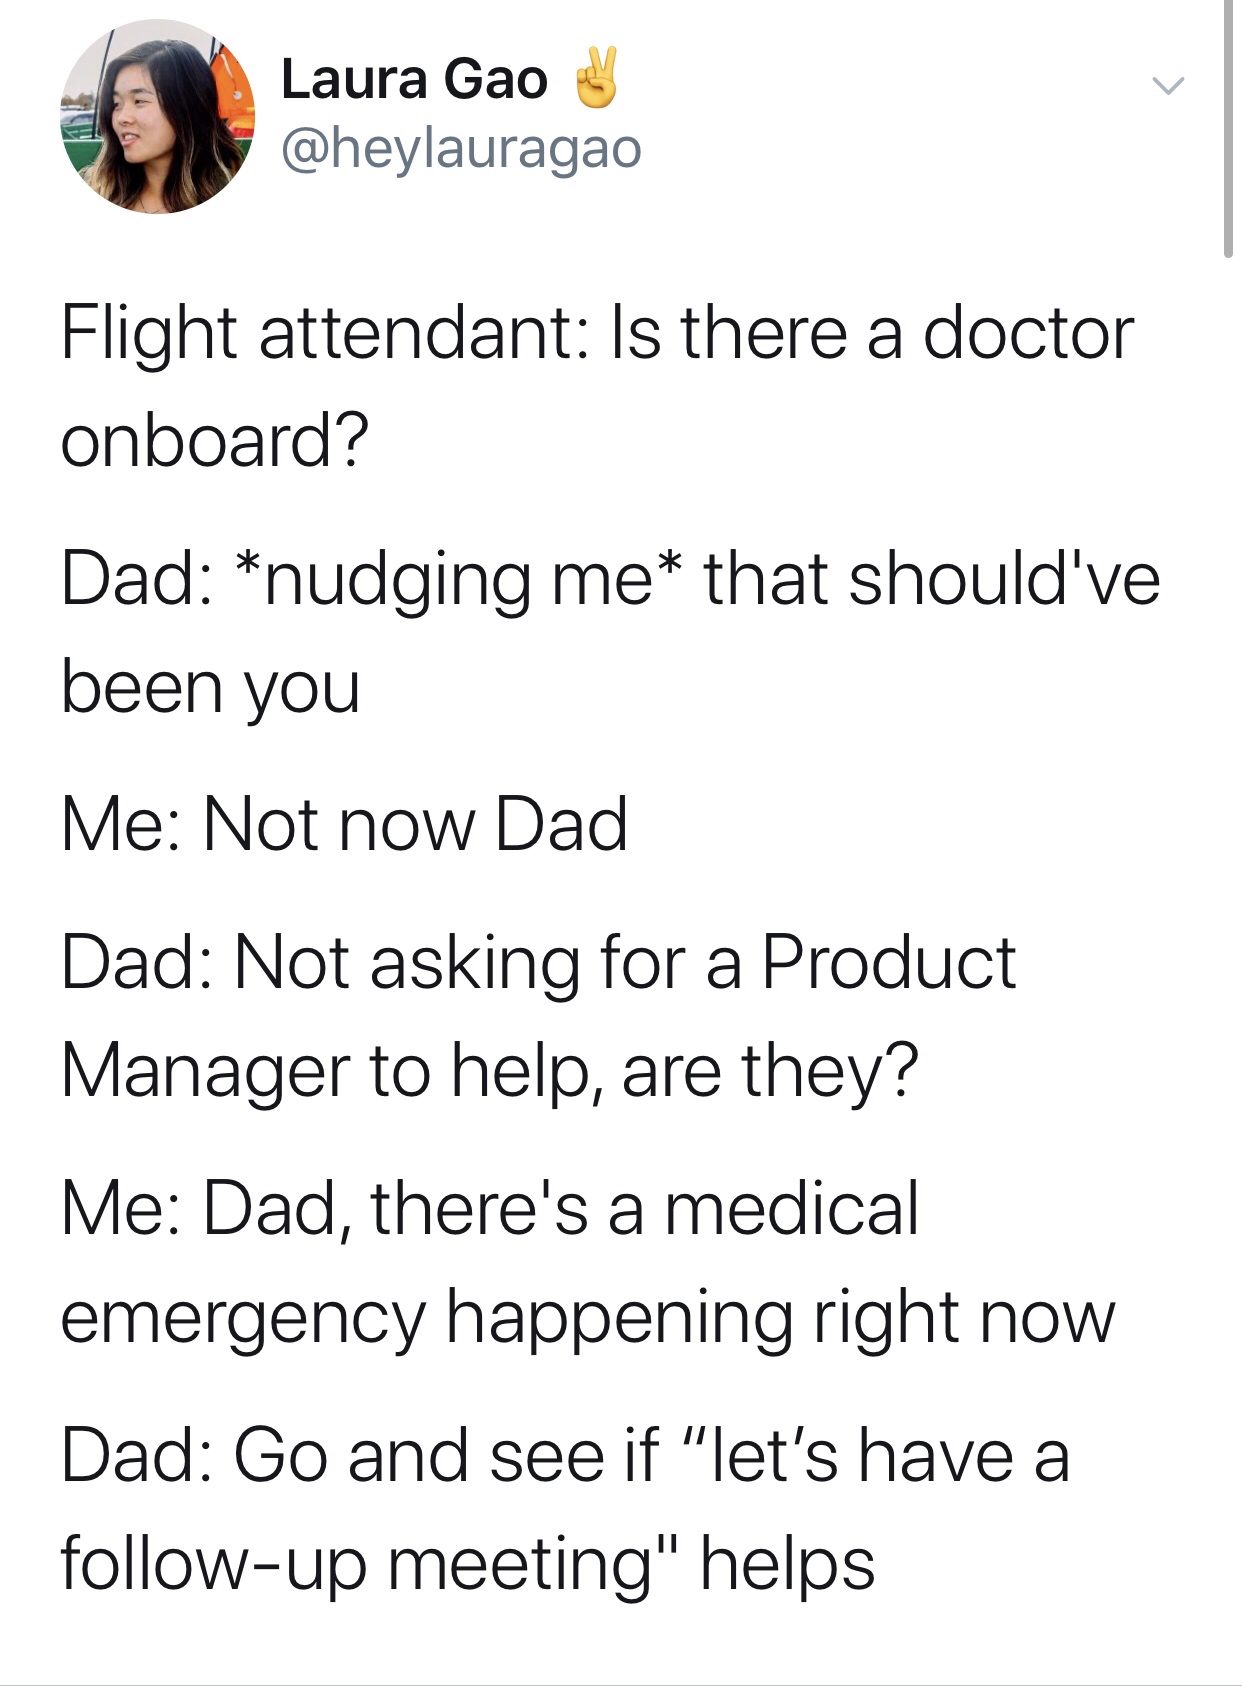 aoc tax the rich - Laura Gao Flight attendant Is there a doctor onboard? Dad nudging me that should've been you Me Not now Dad Dad Not asking for a Product Manager to help, are they? Me Dad, there's a medical emergency happening right now Dad Go and see i